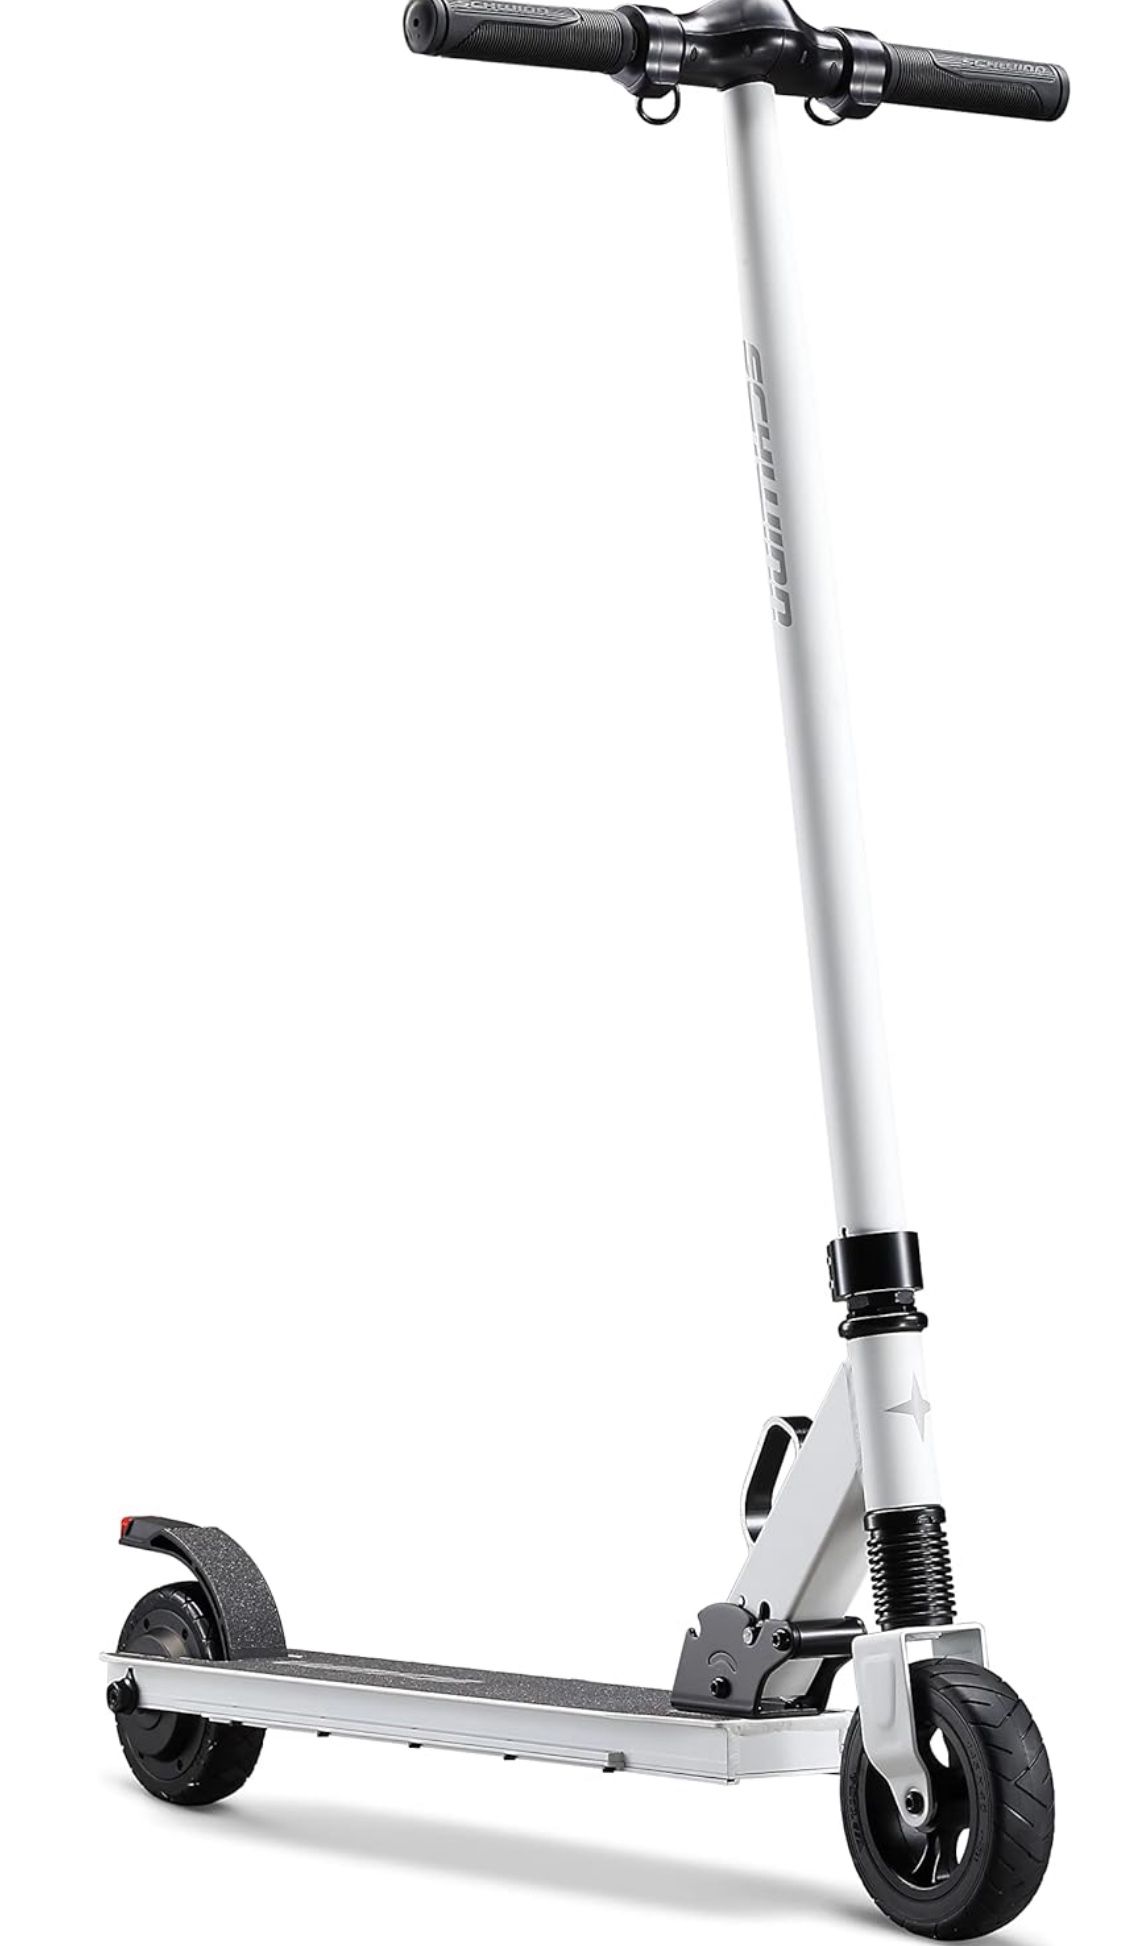 Tone 3 Electric Scooter